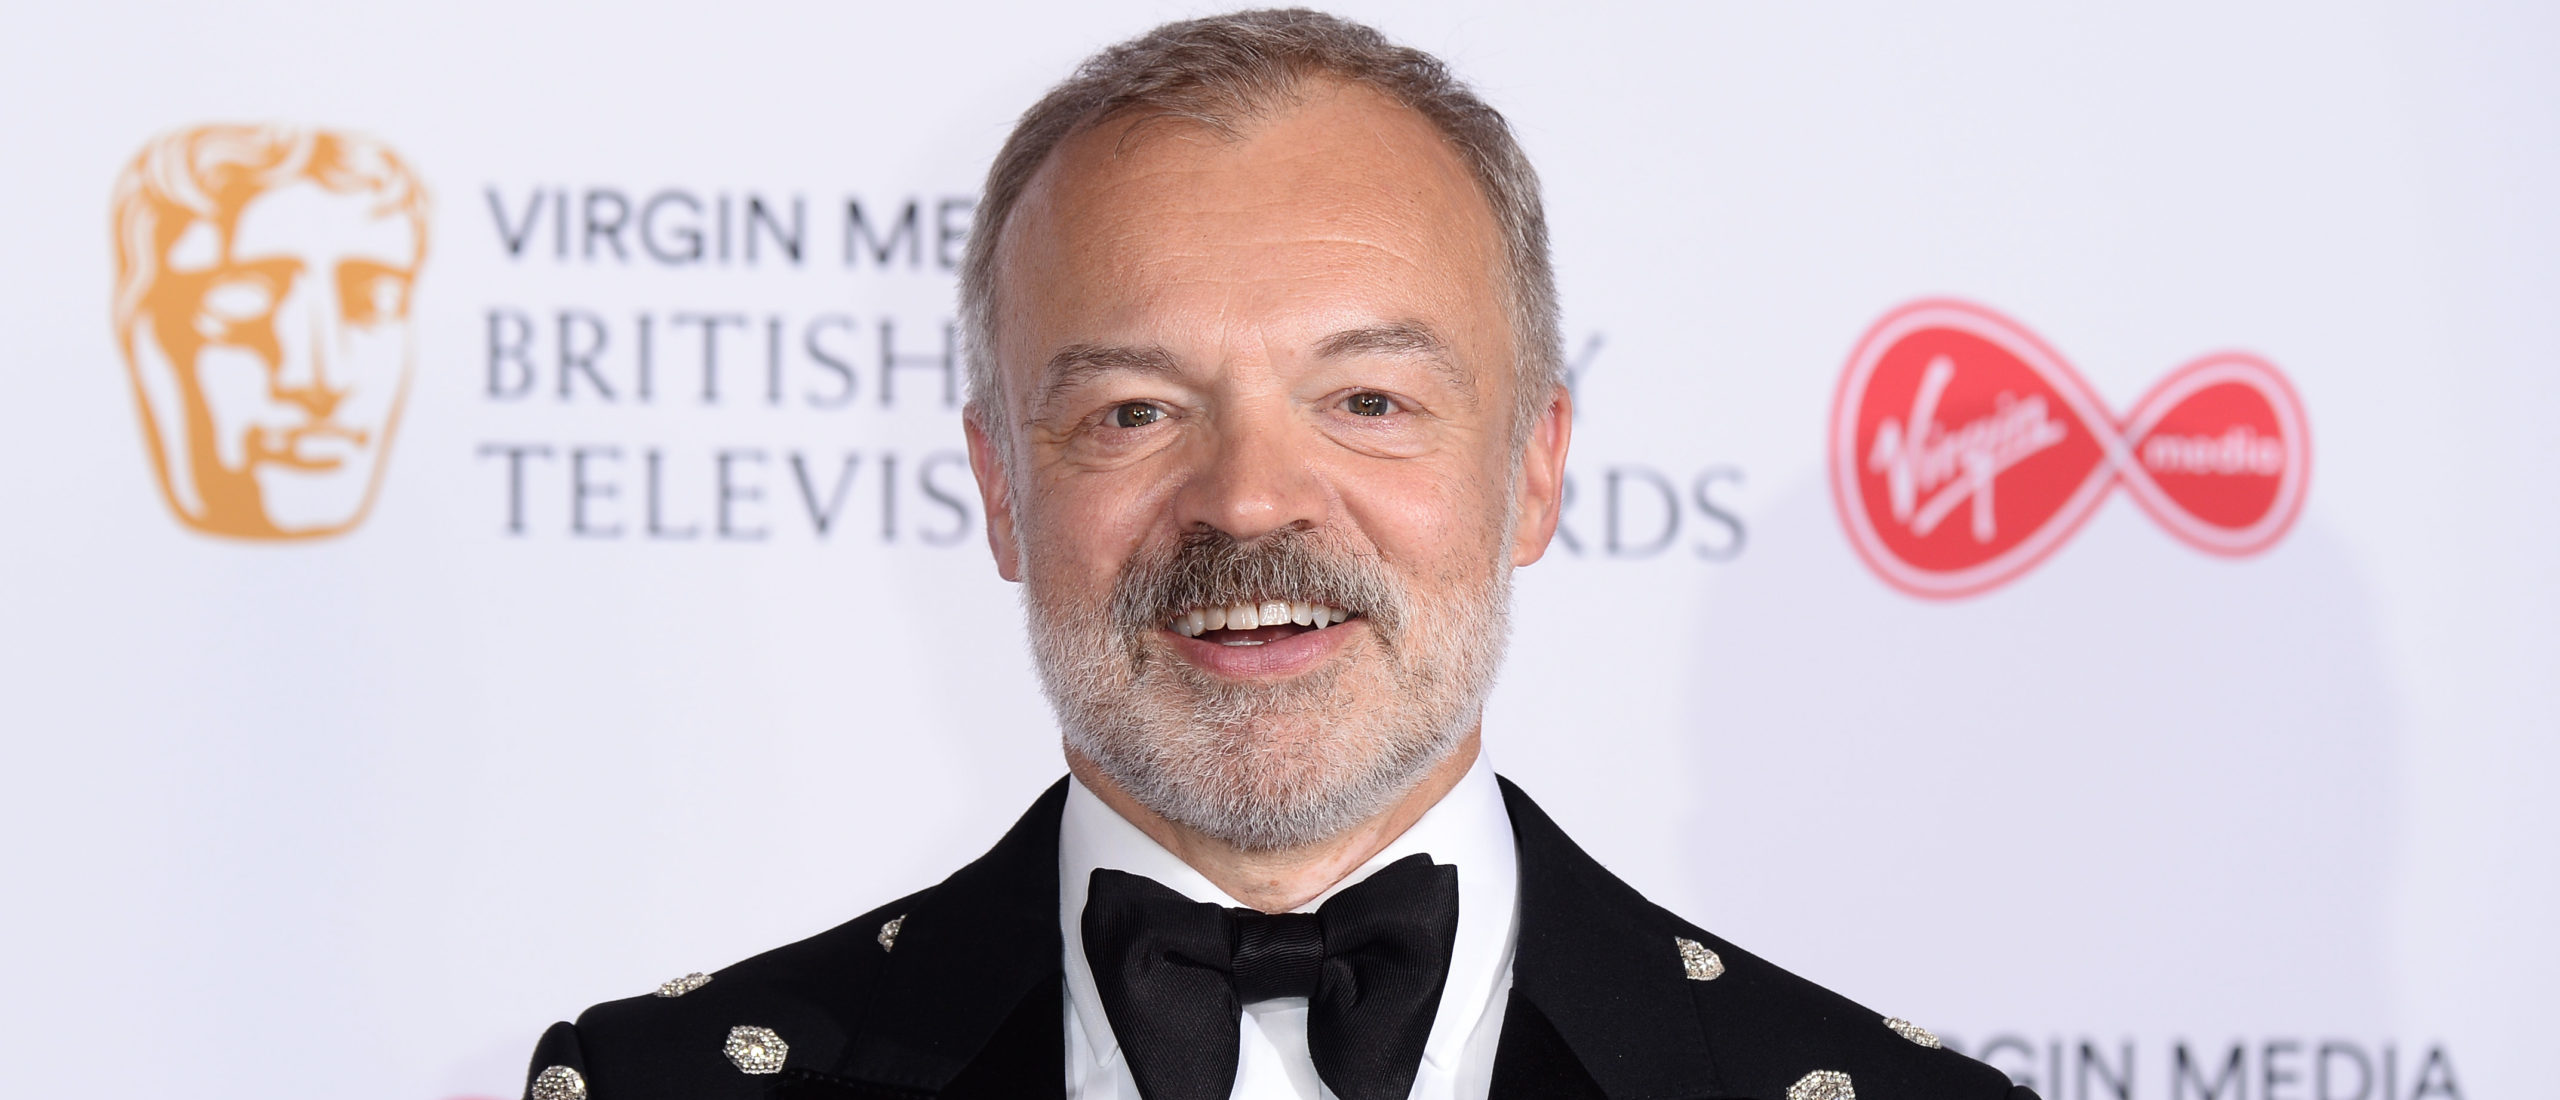 TV Host Graham Norton: ‘Getting Stabbed Was Awful But It Changed My Life For The Better’